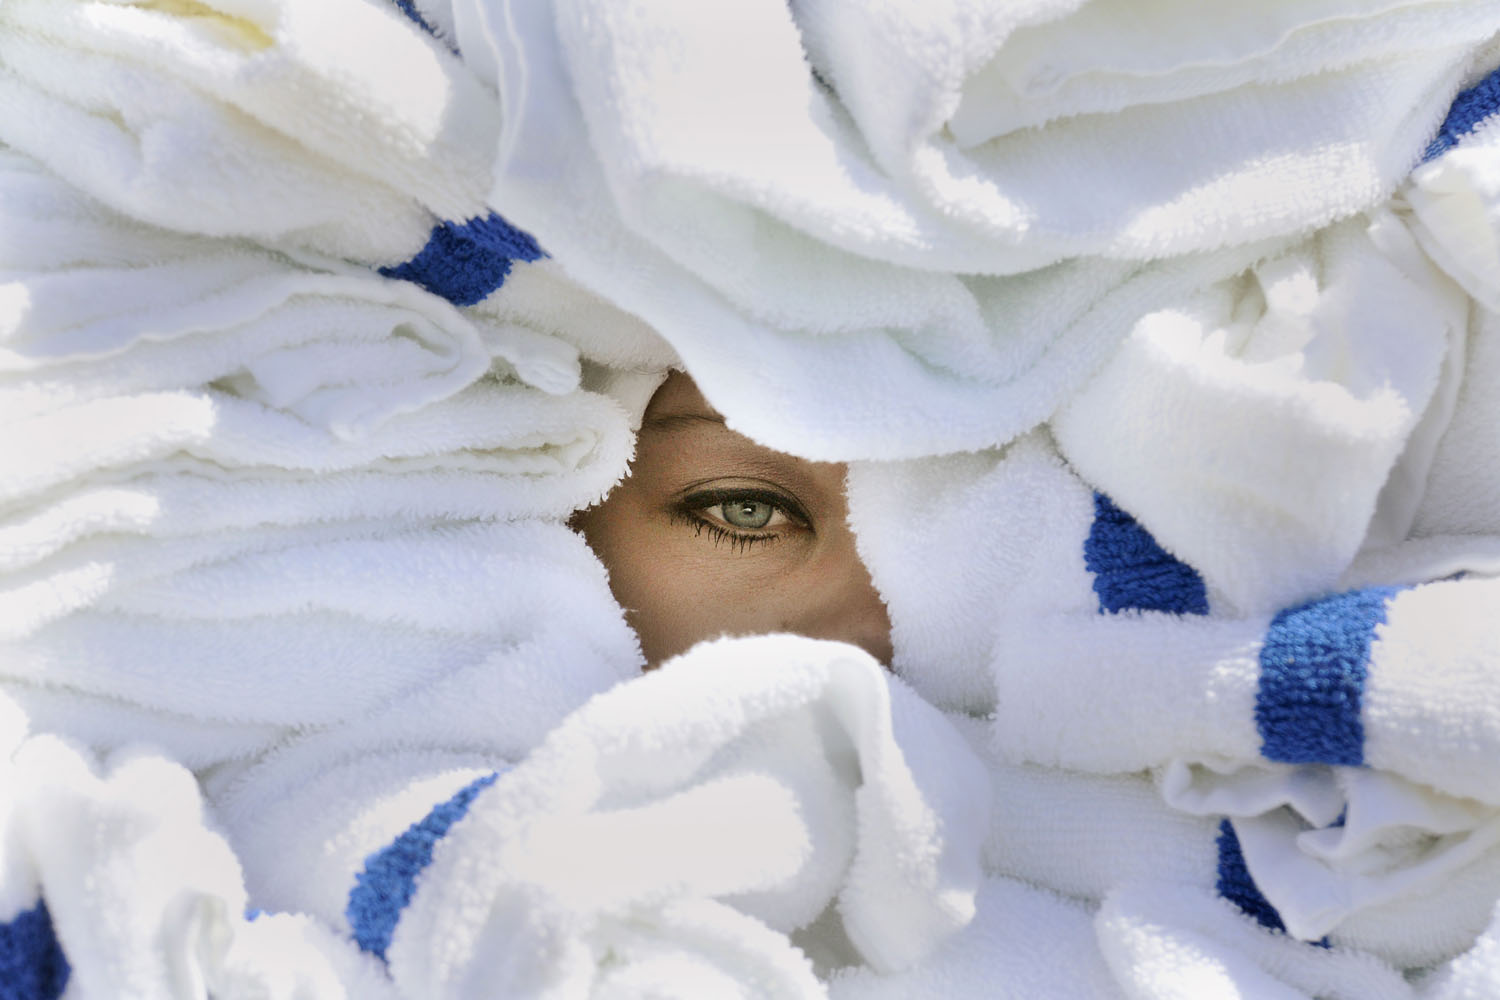 Sept. 8, 2014. Rebecca Redwine from Grandma's in the Park has one eye visible from between nearly 100 towels as she competes in the towel carrying contest during the 10th annual Iron Range Housekeeping Olympics held Monday at AmericInn in Virginia, Minn.